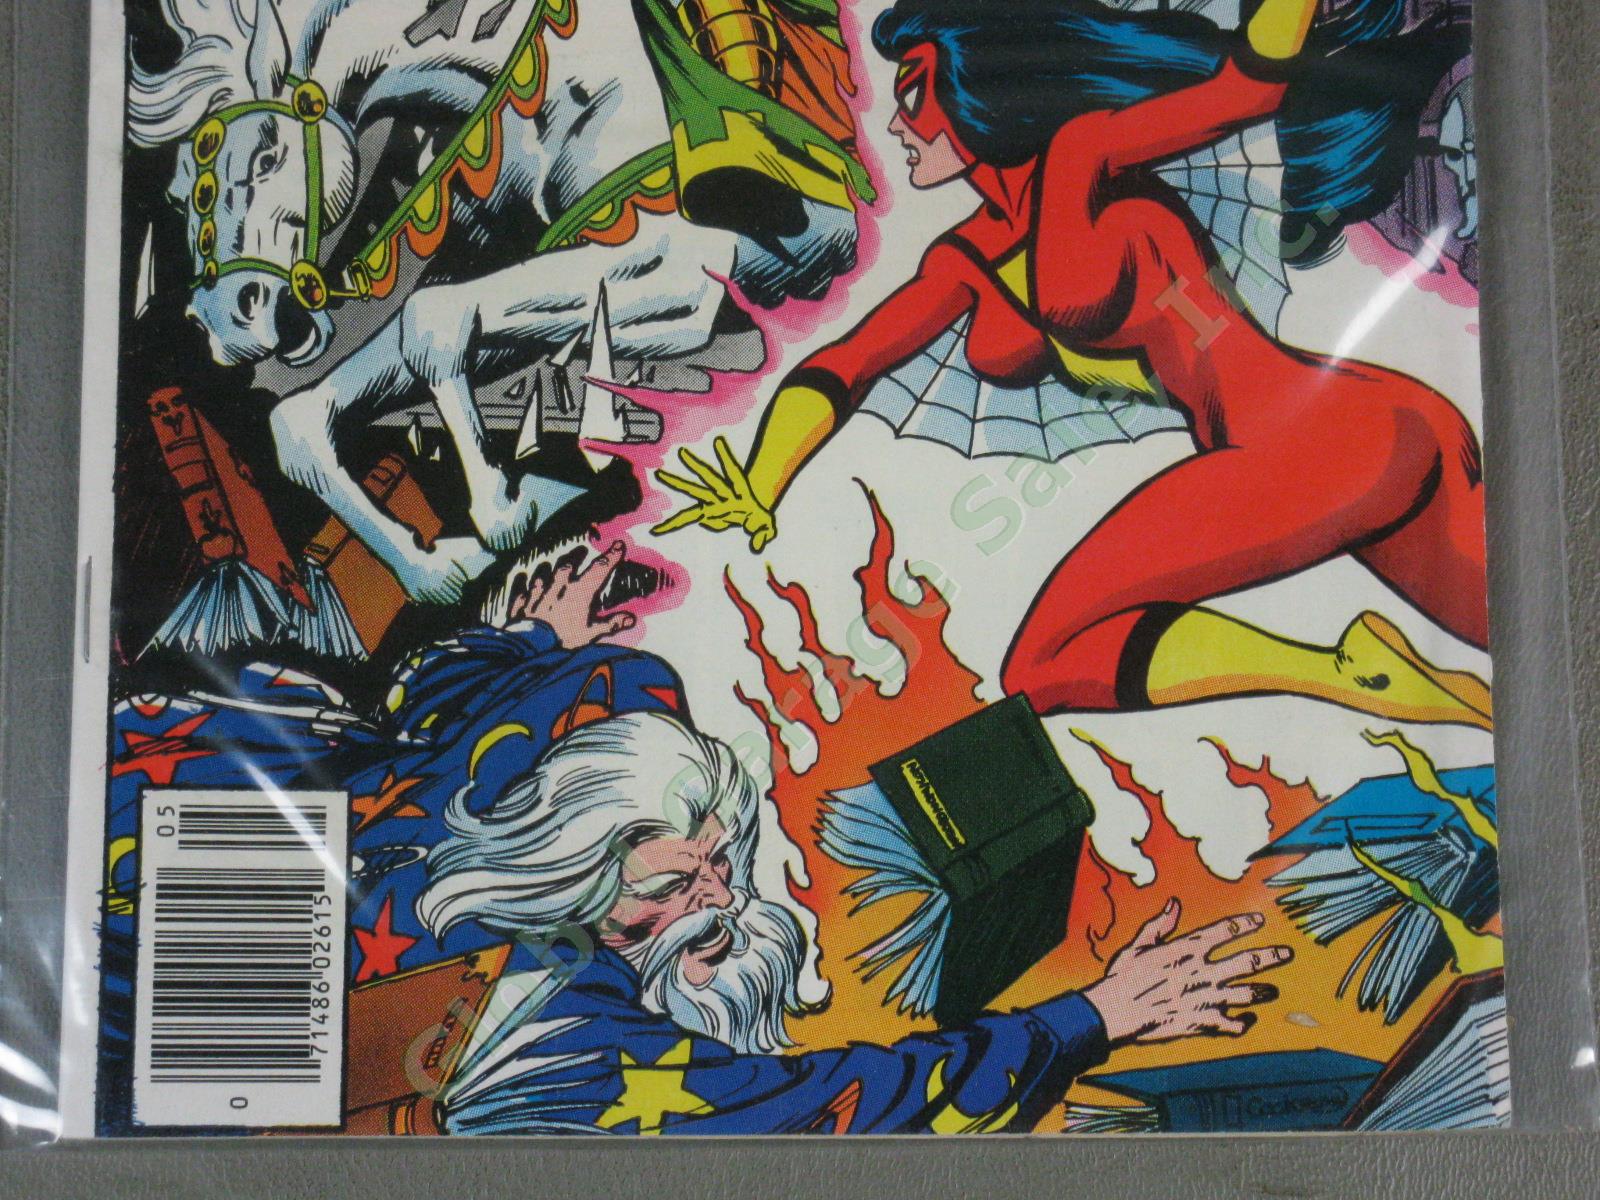 48 Vtg Marvel Spider-Woman Comic Book Collection Lot Runs 1-8 10-36 38-40 42-50 4